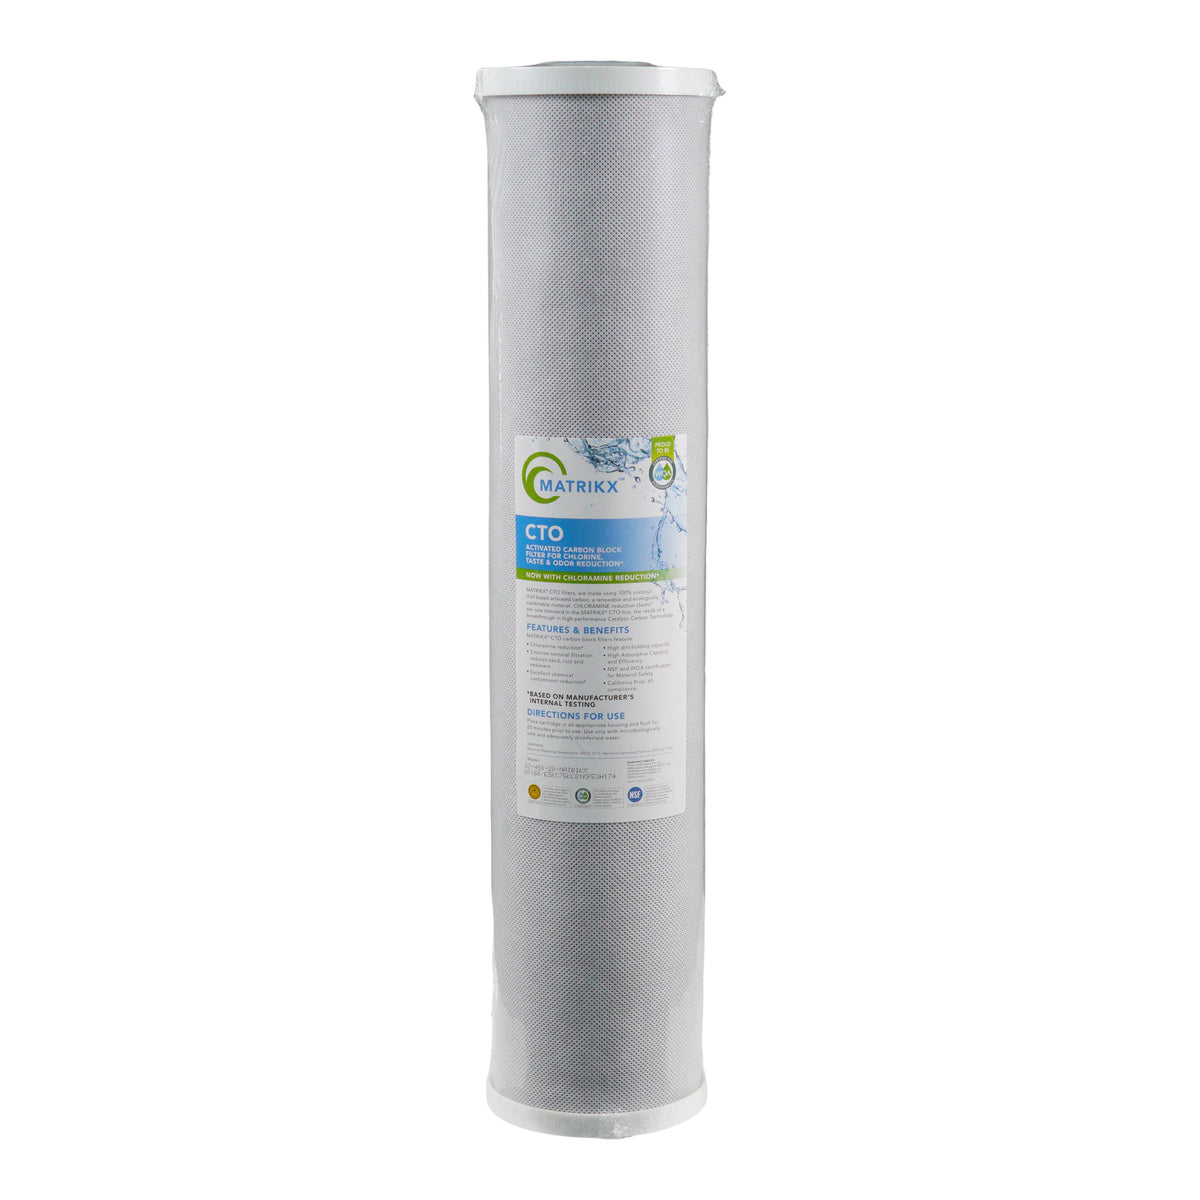 Greenway GAUVR10-20S Replacement UV Lamp, Sleeve and Filters- Free Ship